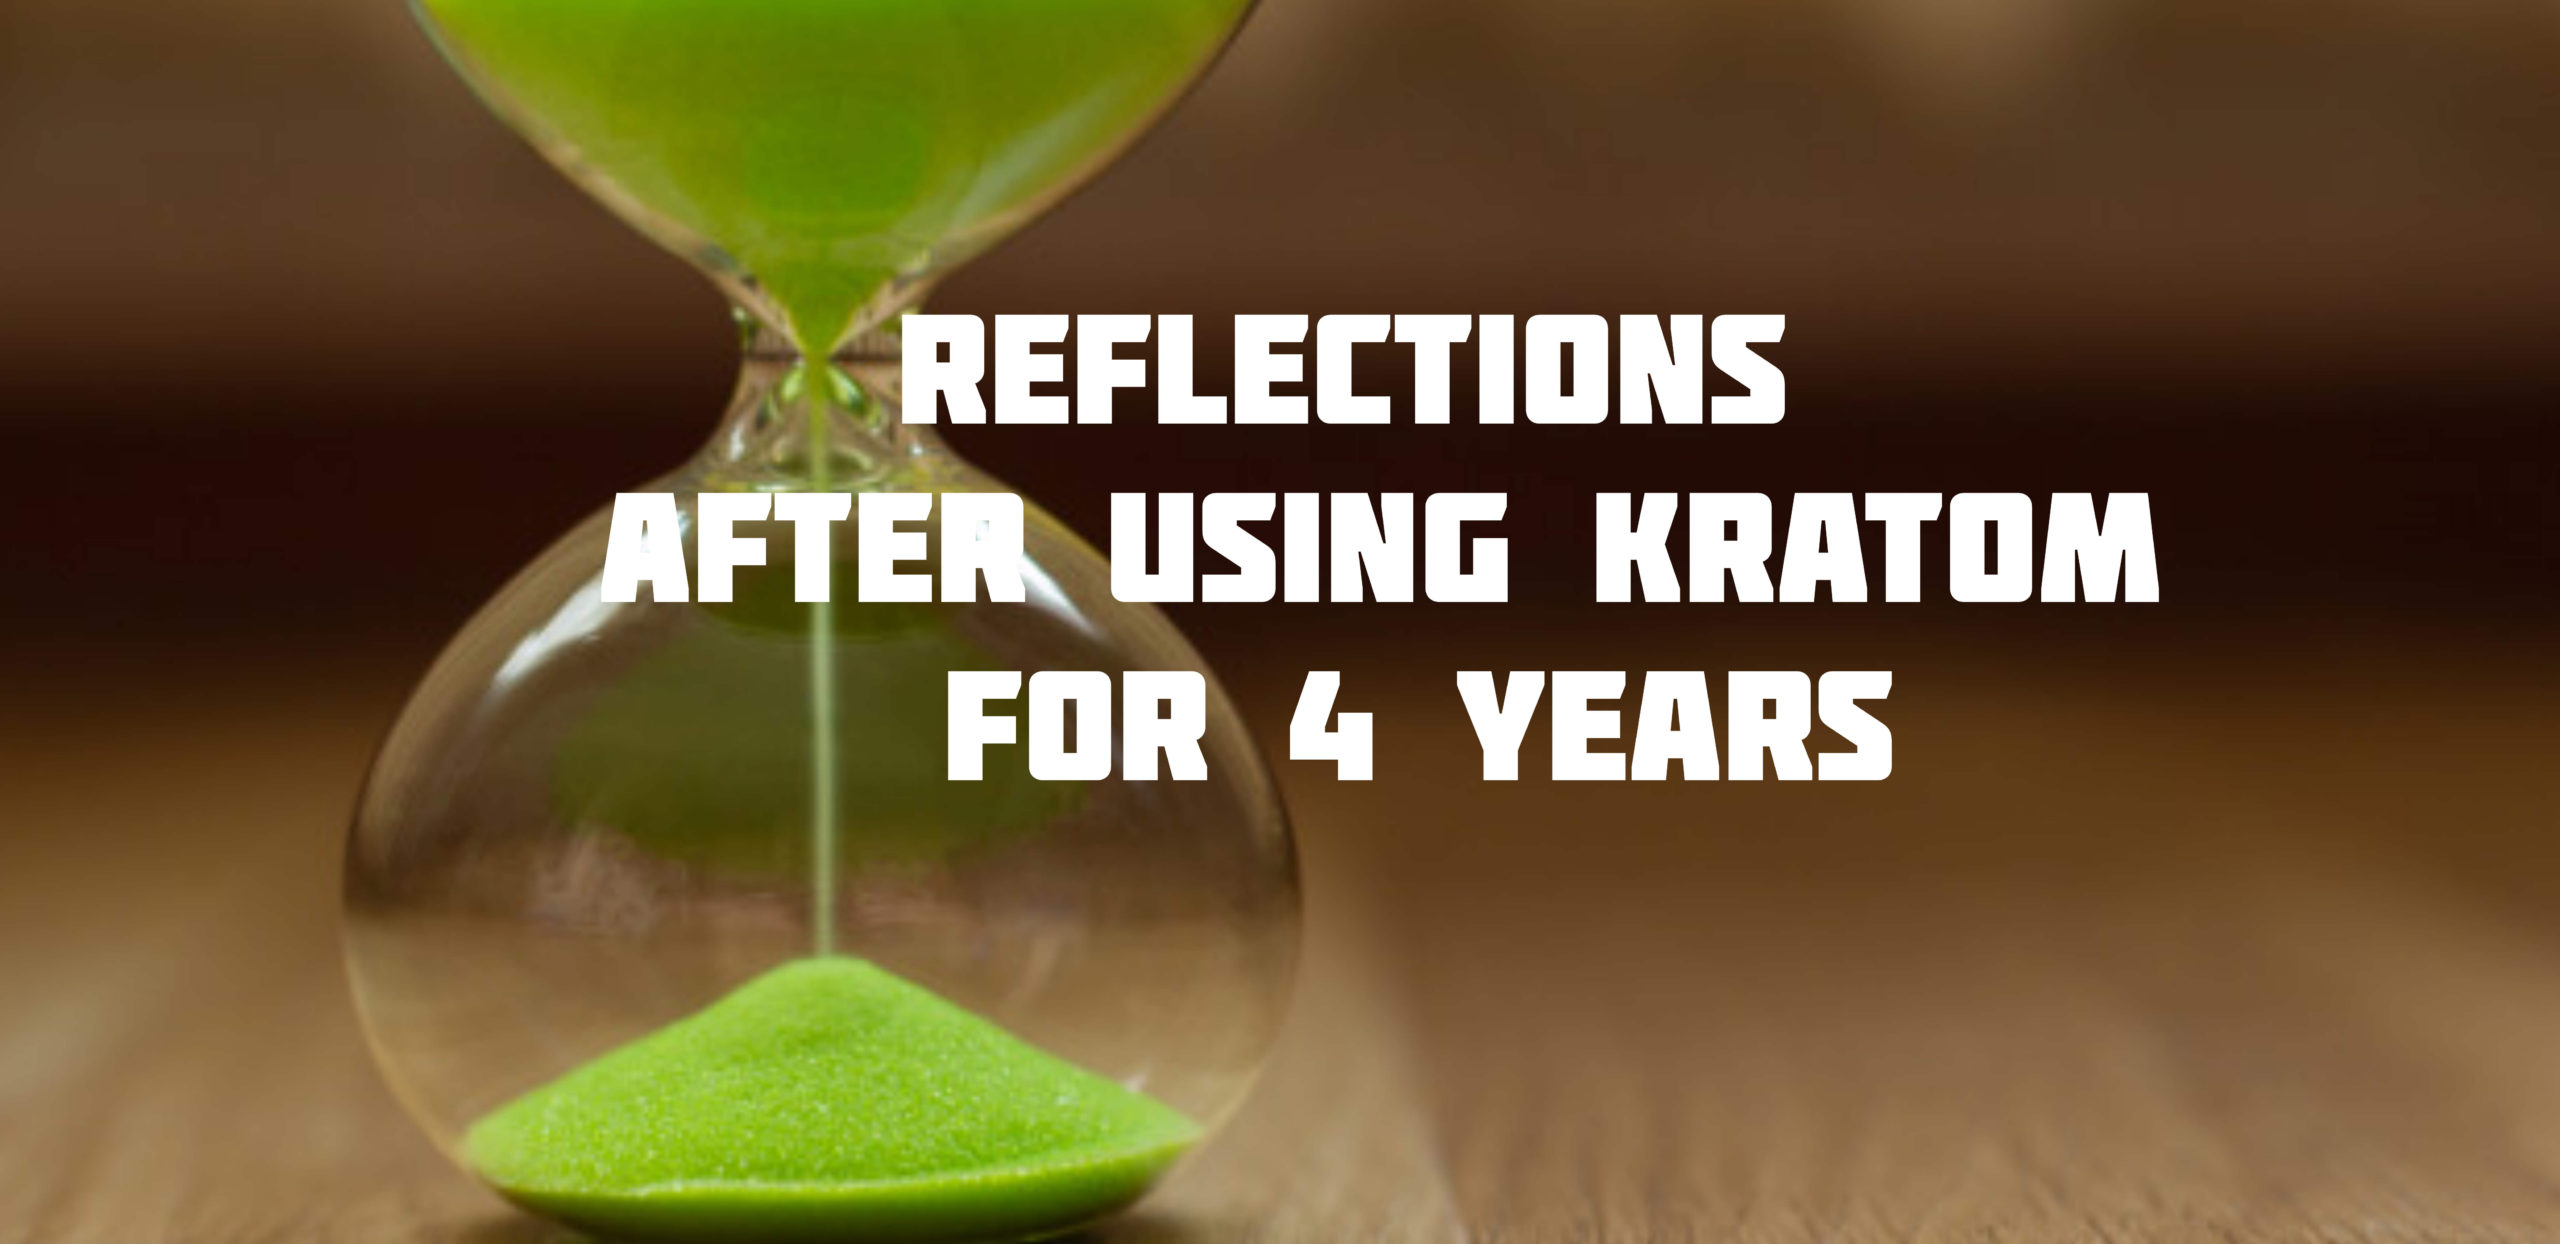 You are currently viewing Reflections After Using Kratom for 4 Years